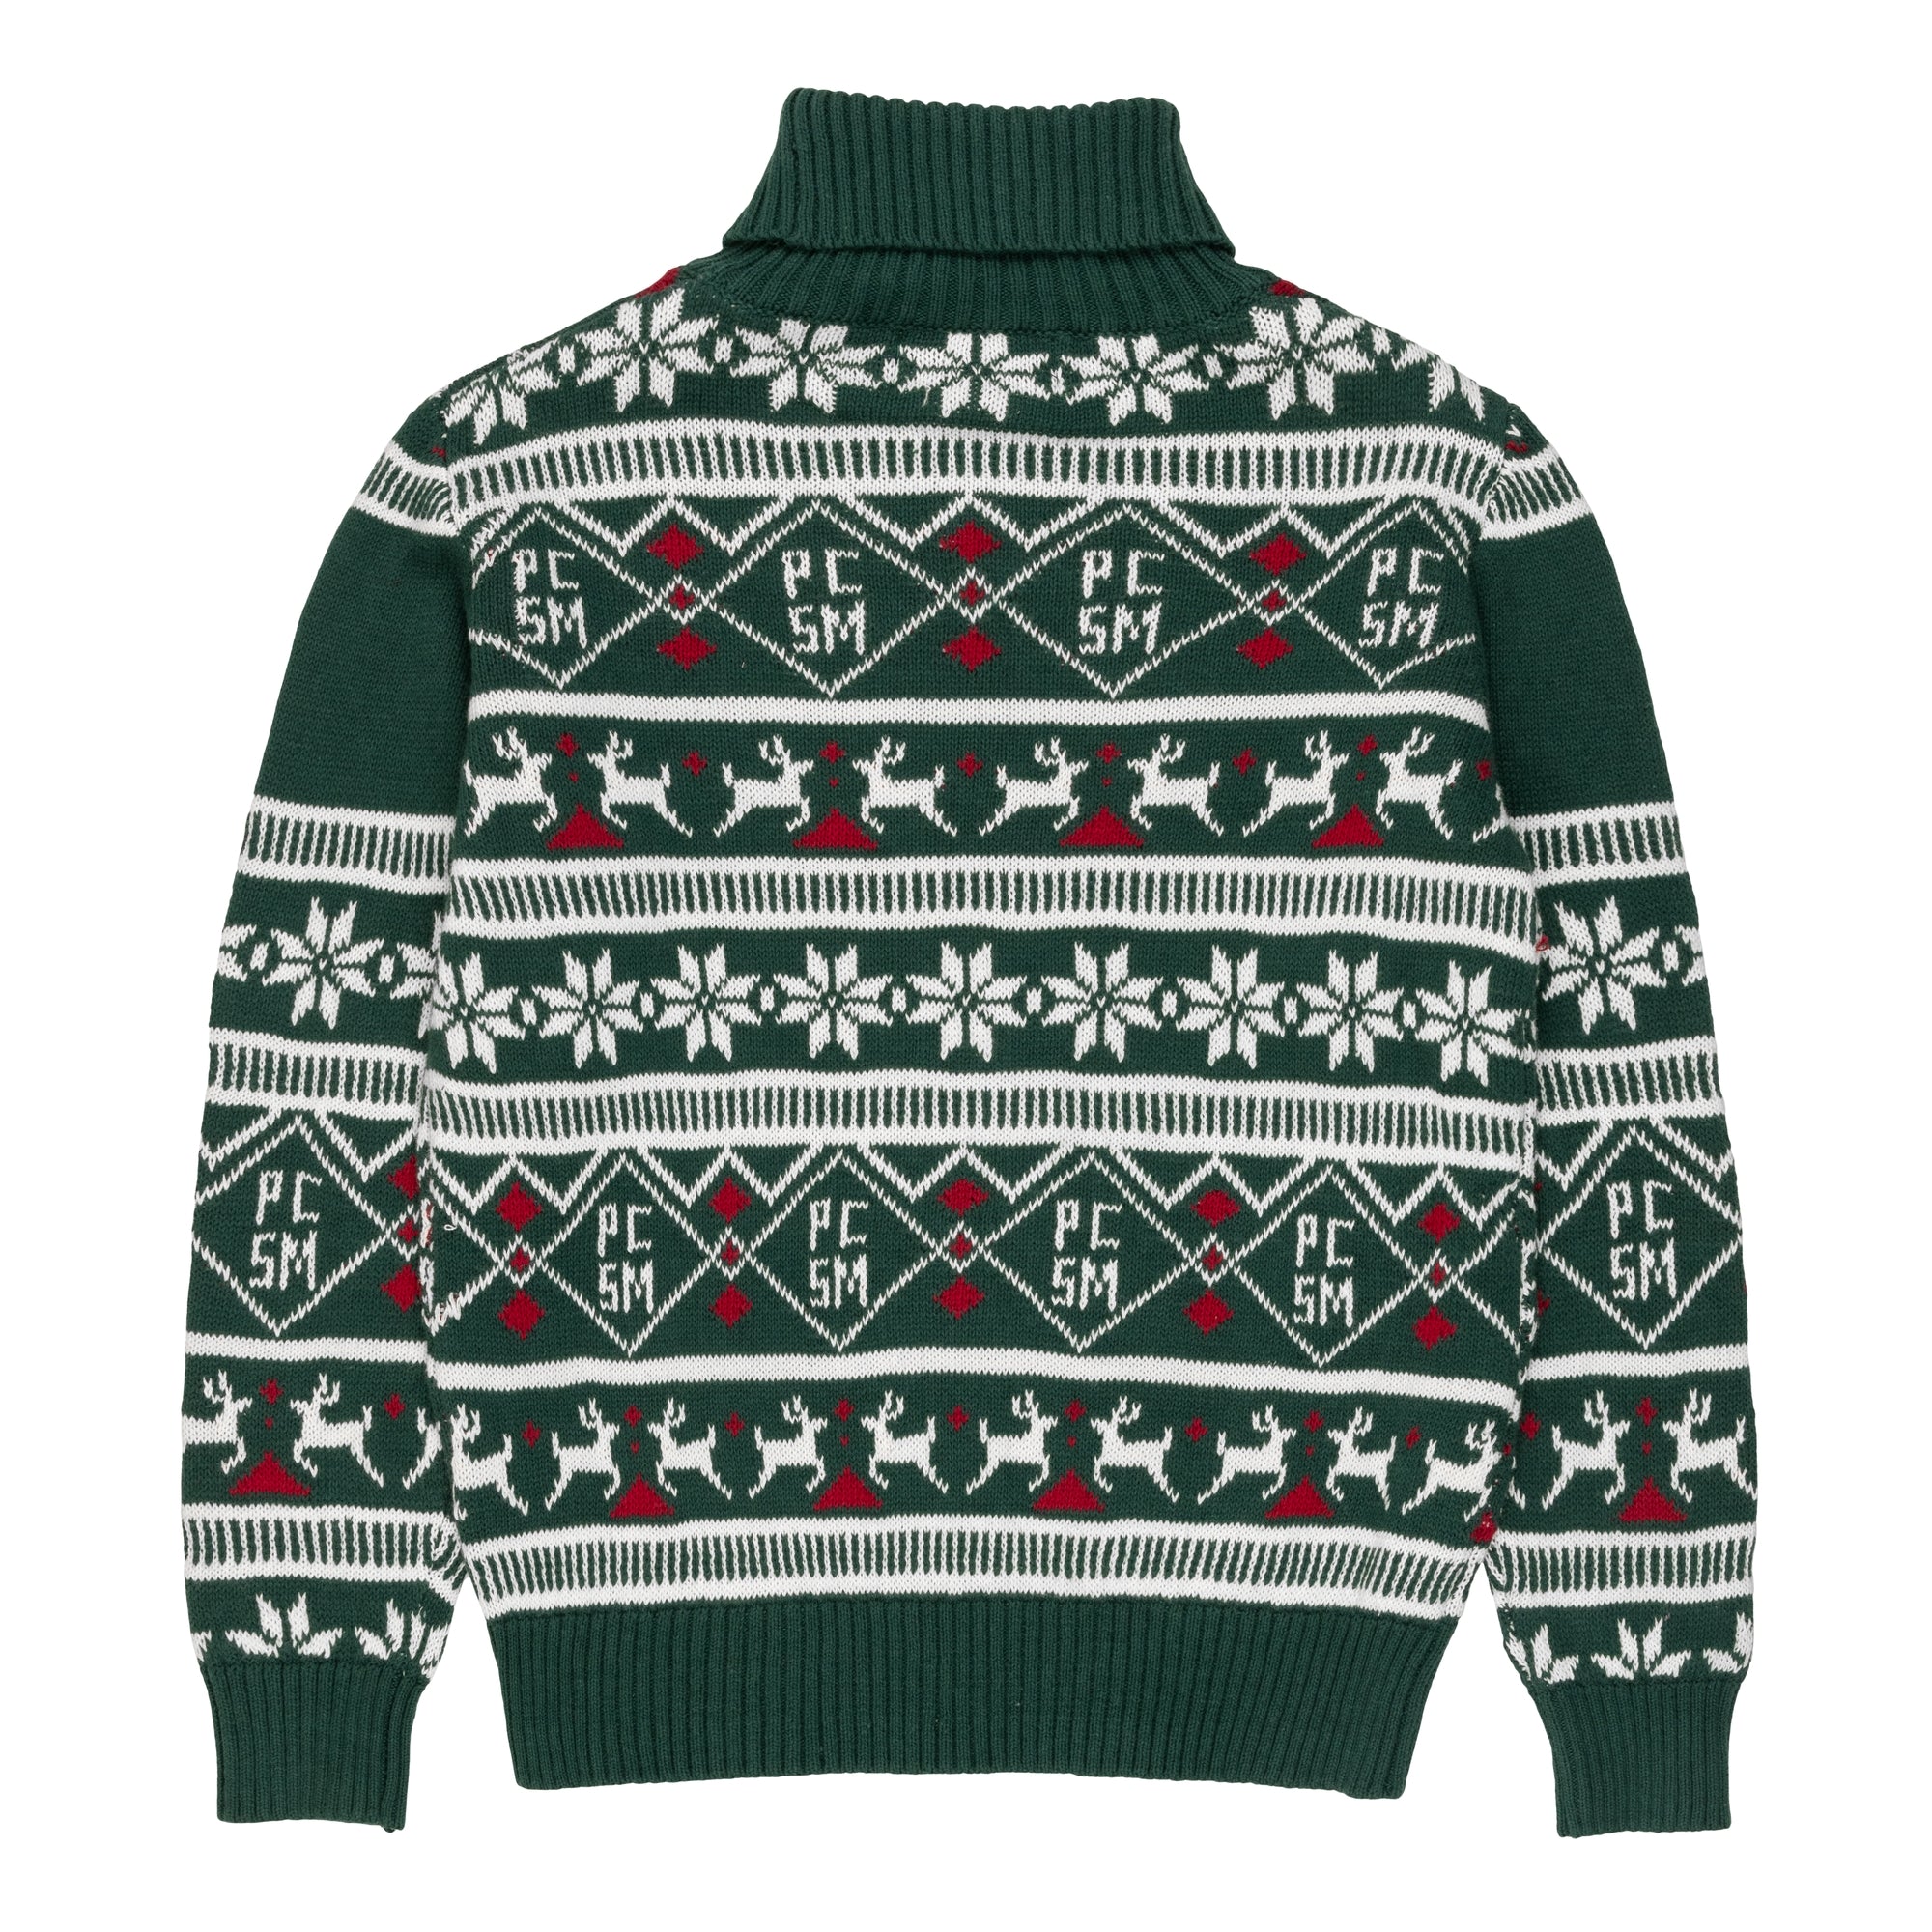 Green Christmas high neck sweater, gauge 7, with inlays